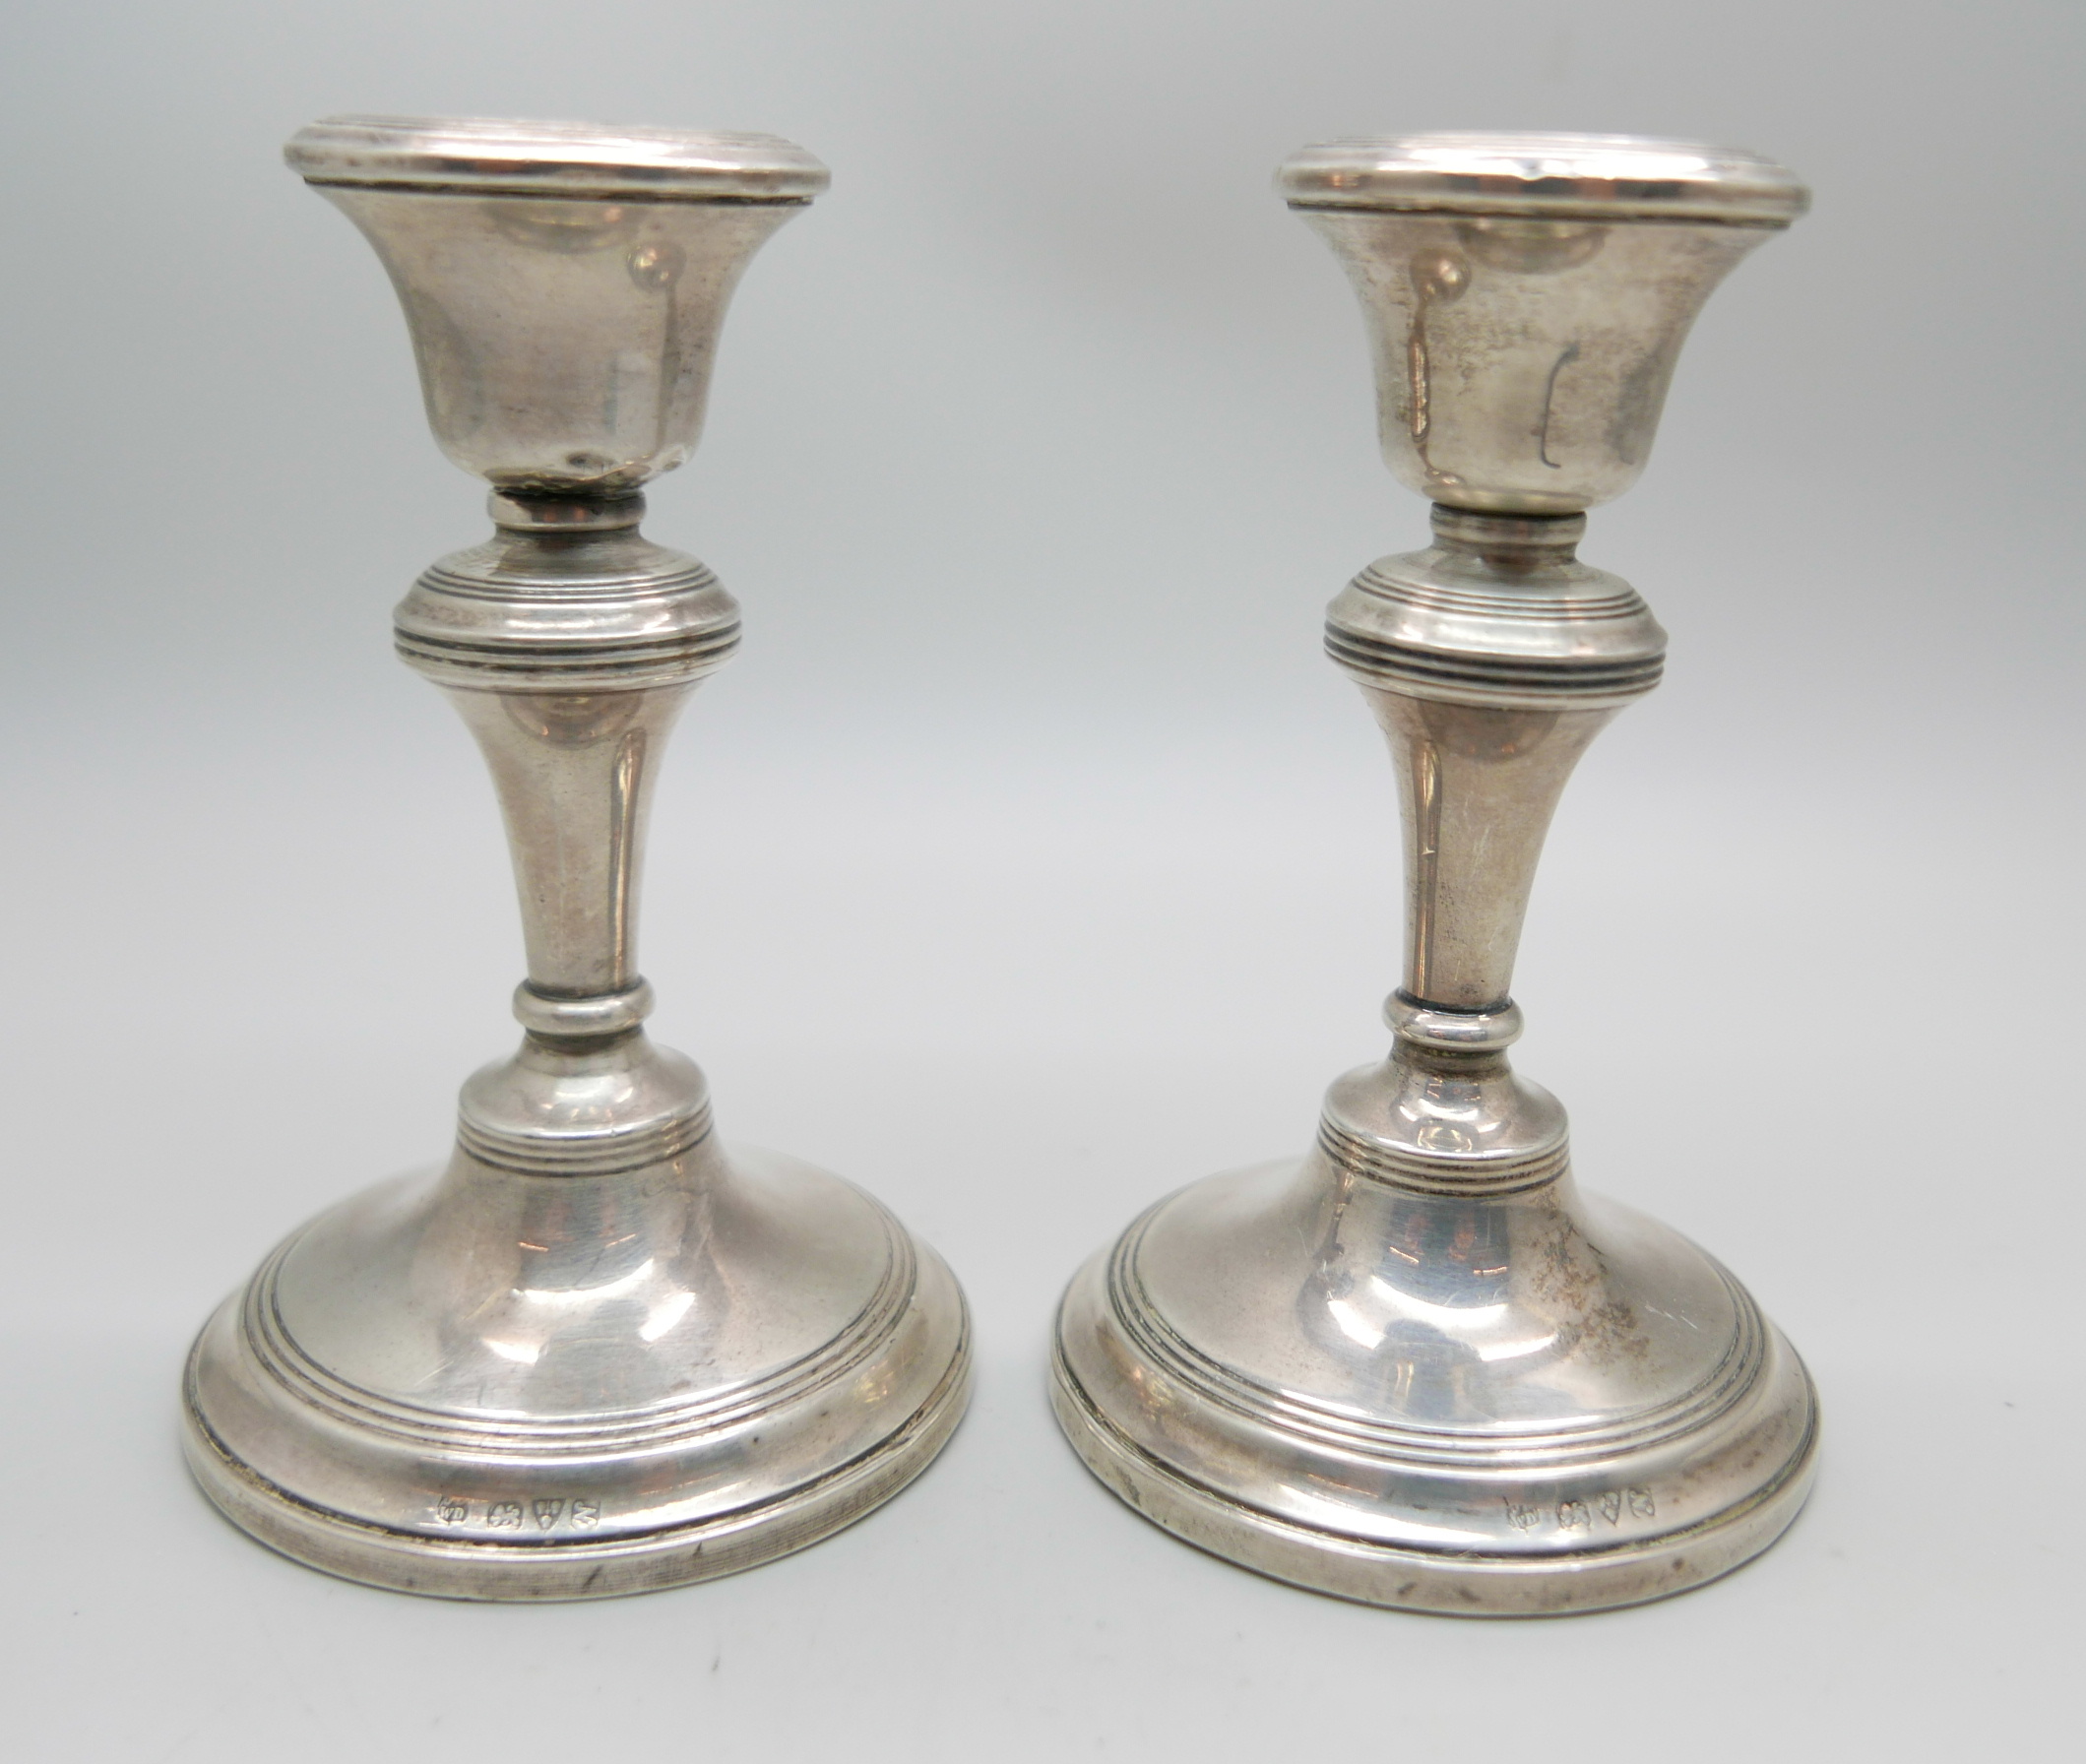 A pair of candlesticks, Chester 1913, 10cm